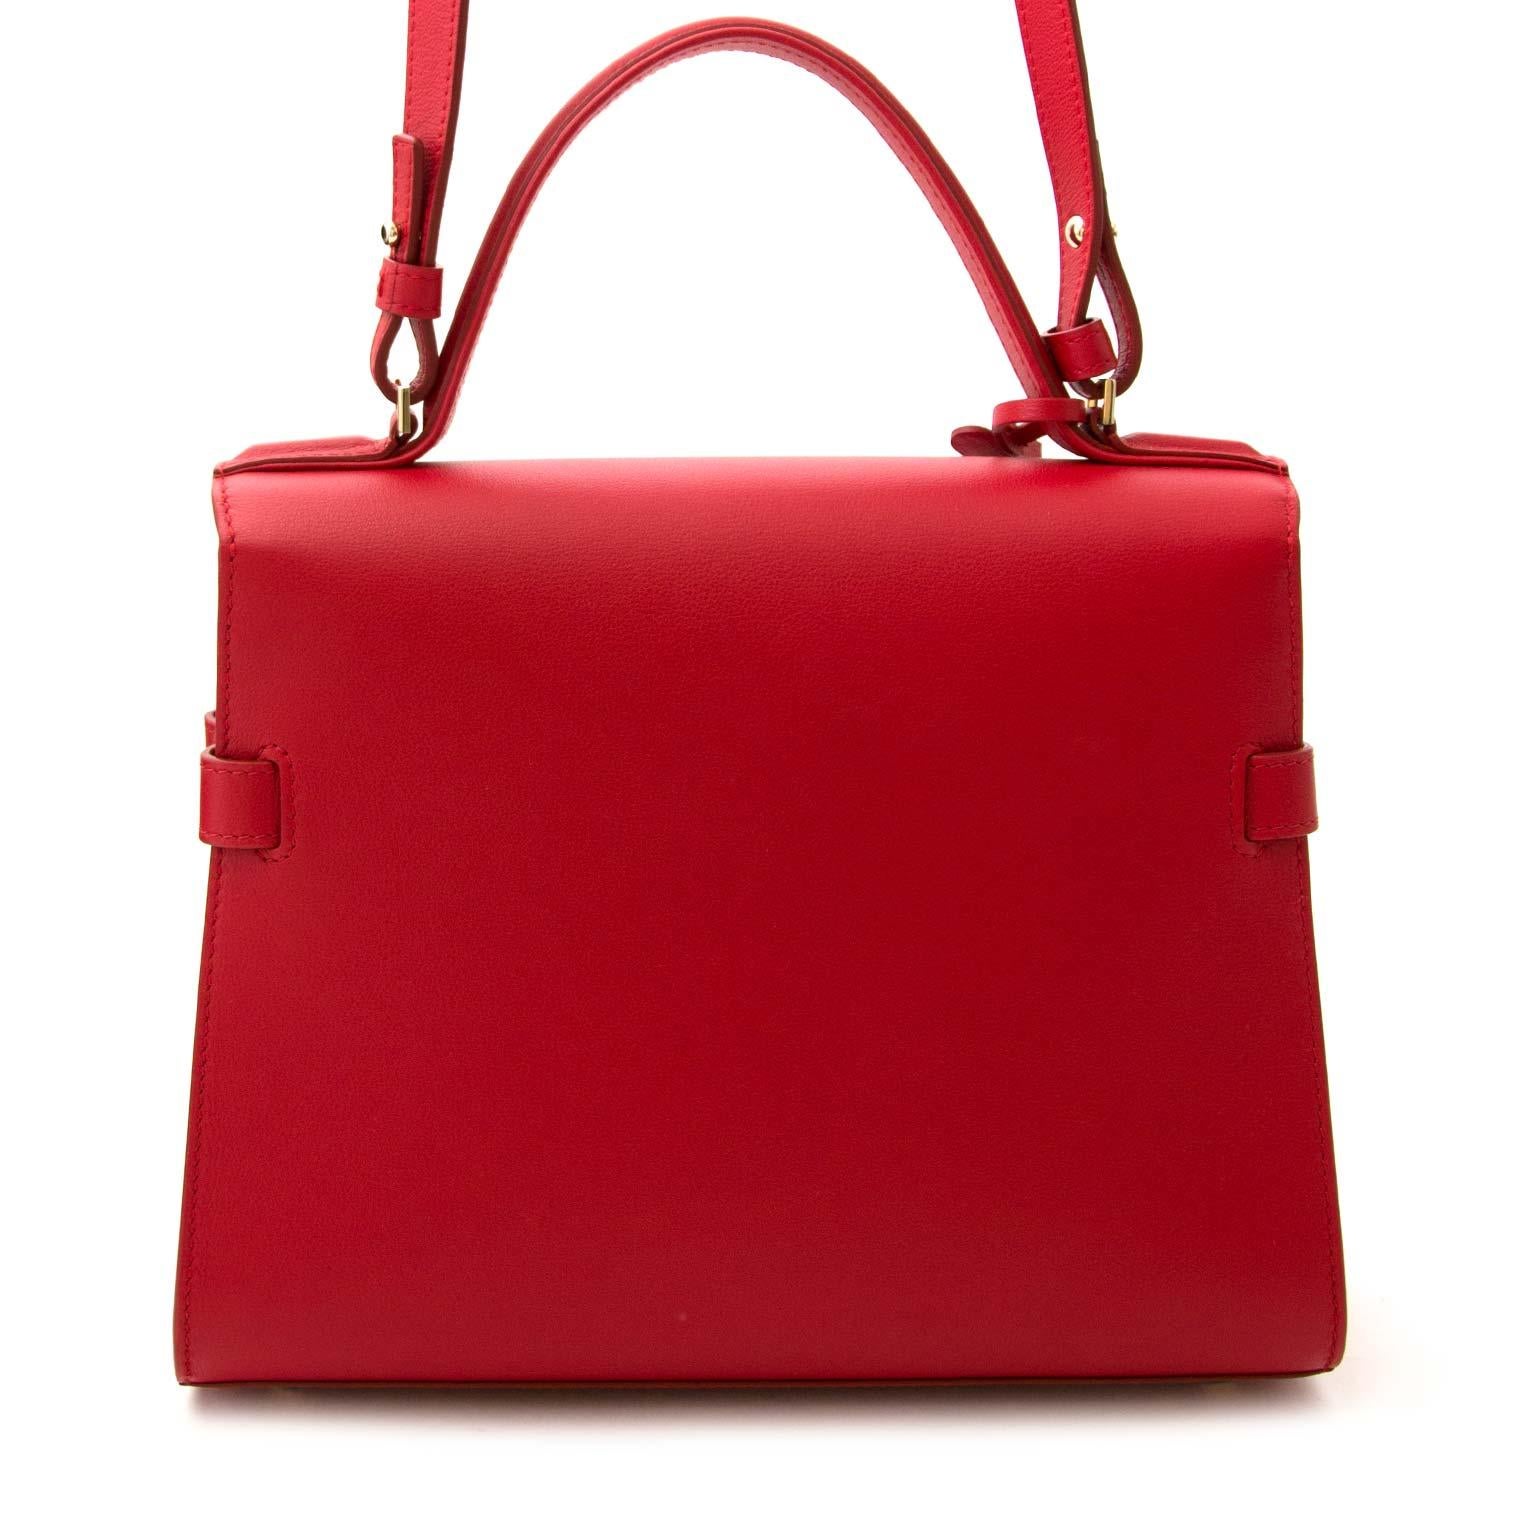 Excellent Condition

Delvaux Tempete MM Rouge Lipstick

One of Delvaux true icons this lipstick red tempete in supple grained calfskin.
With its gold toned hardware and geometric shape, this beauty is one of Delvaux's most architectural bags.
The